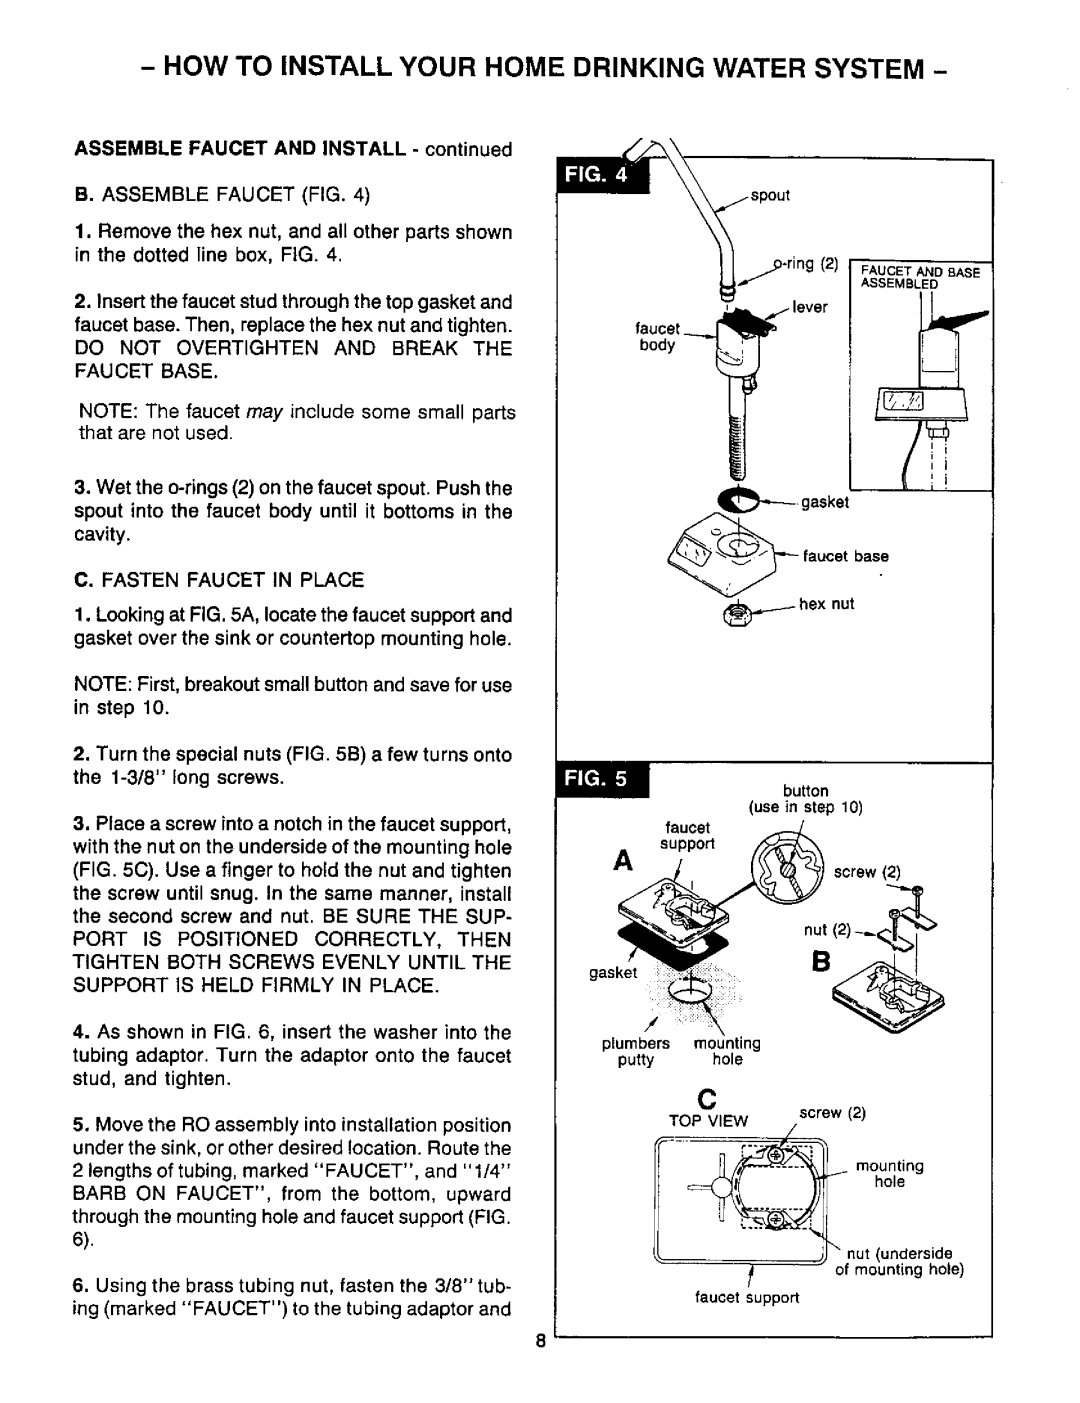 Sears RO 2000 manual How To Install Your Home Drinking Water System 